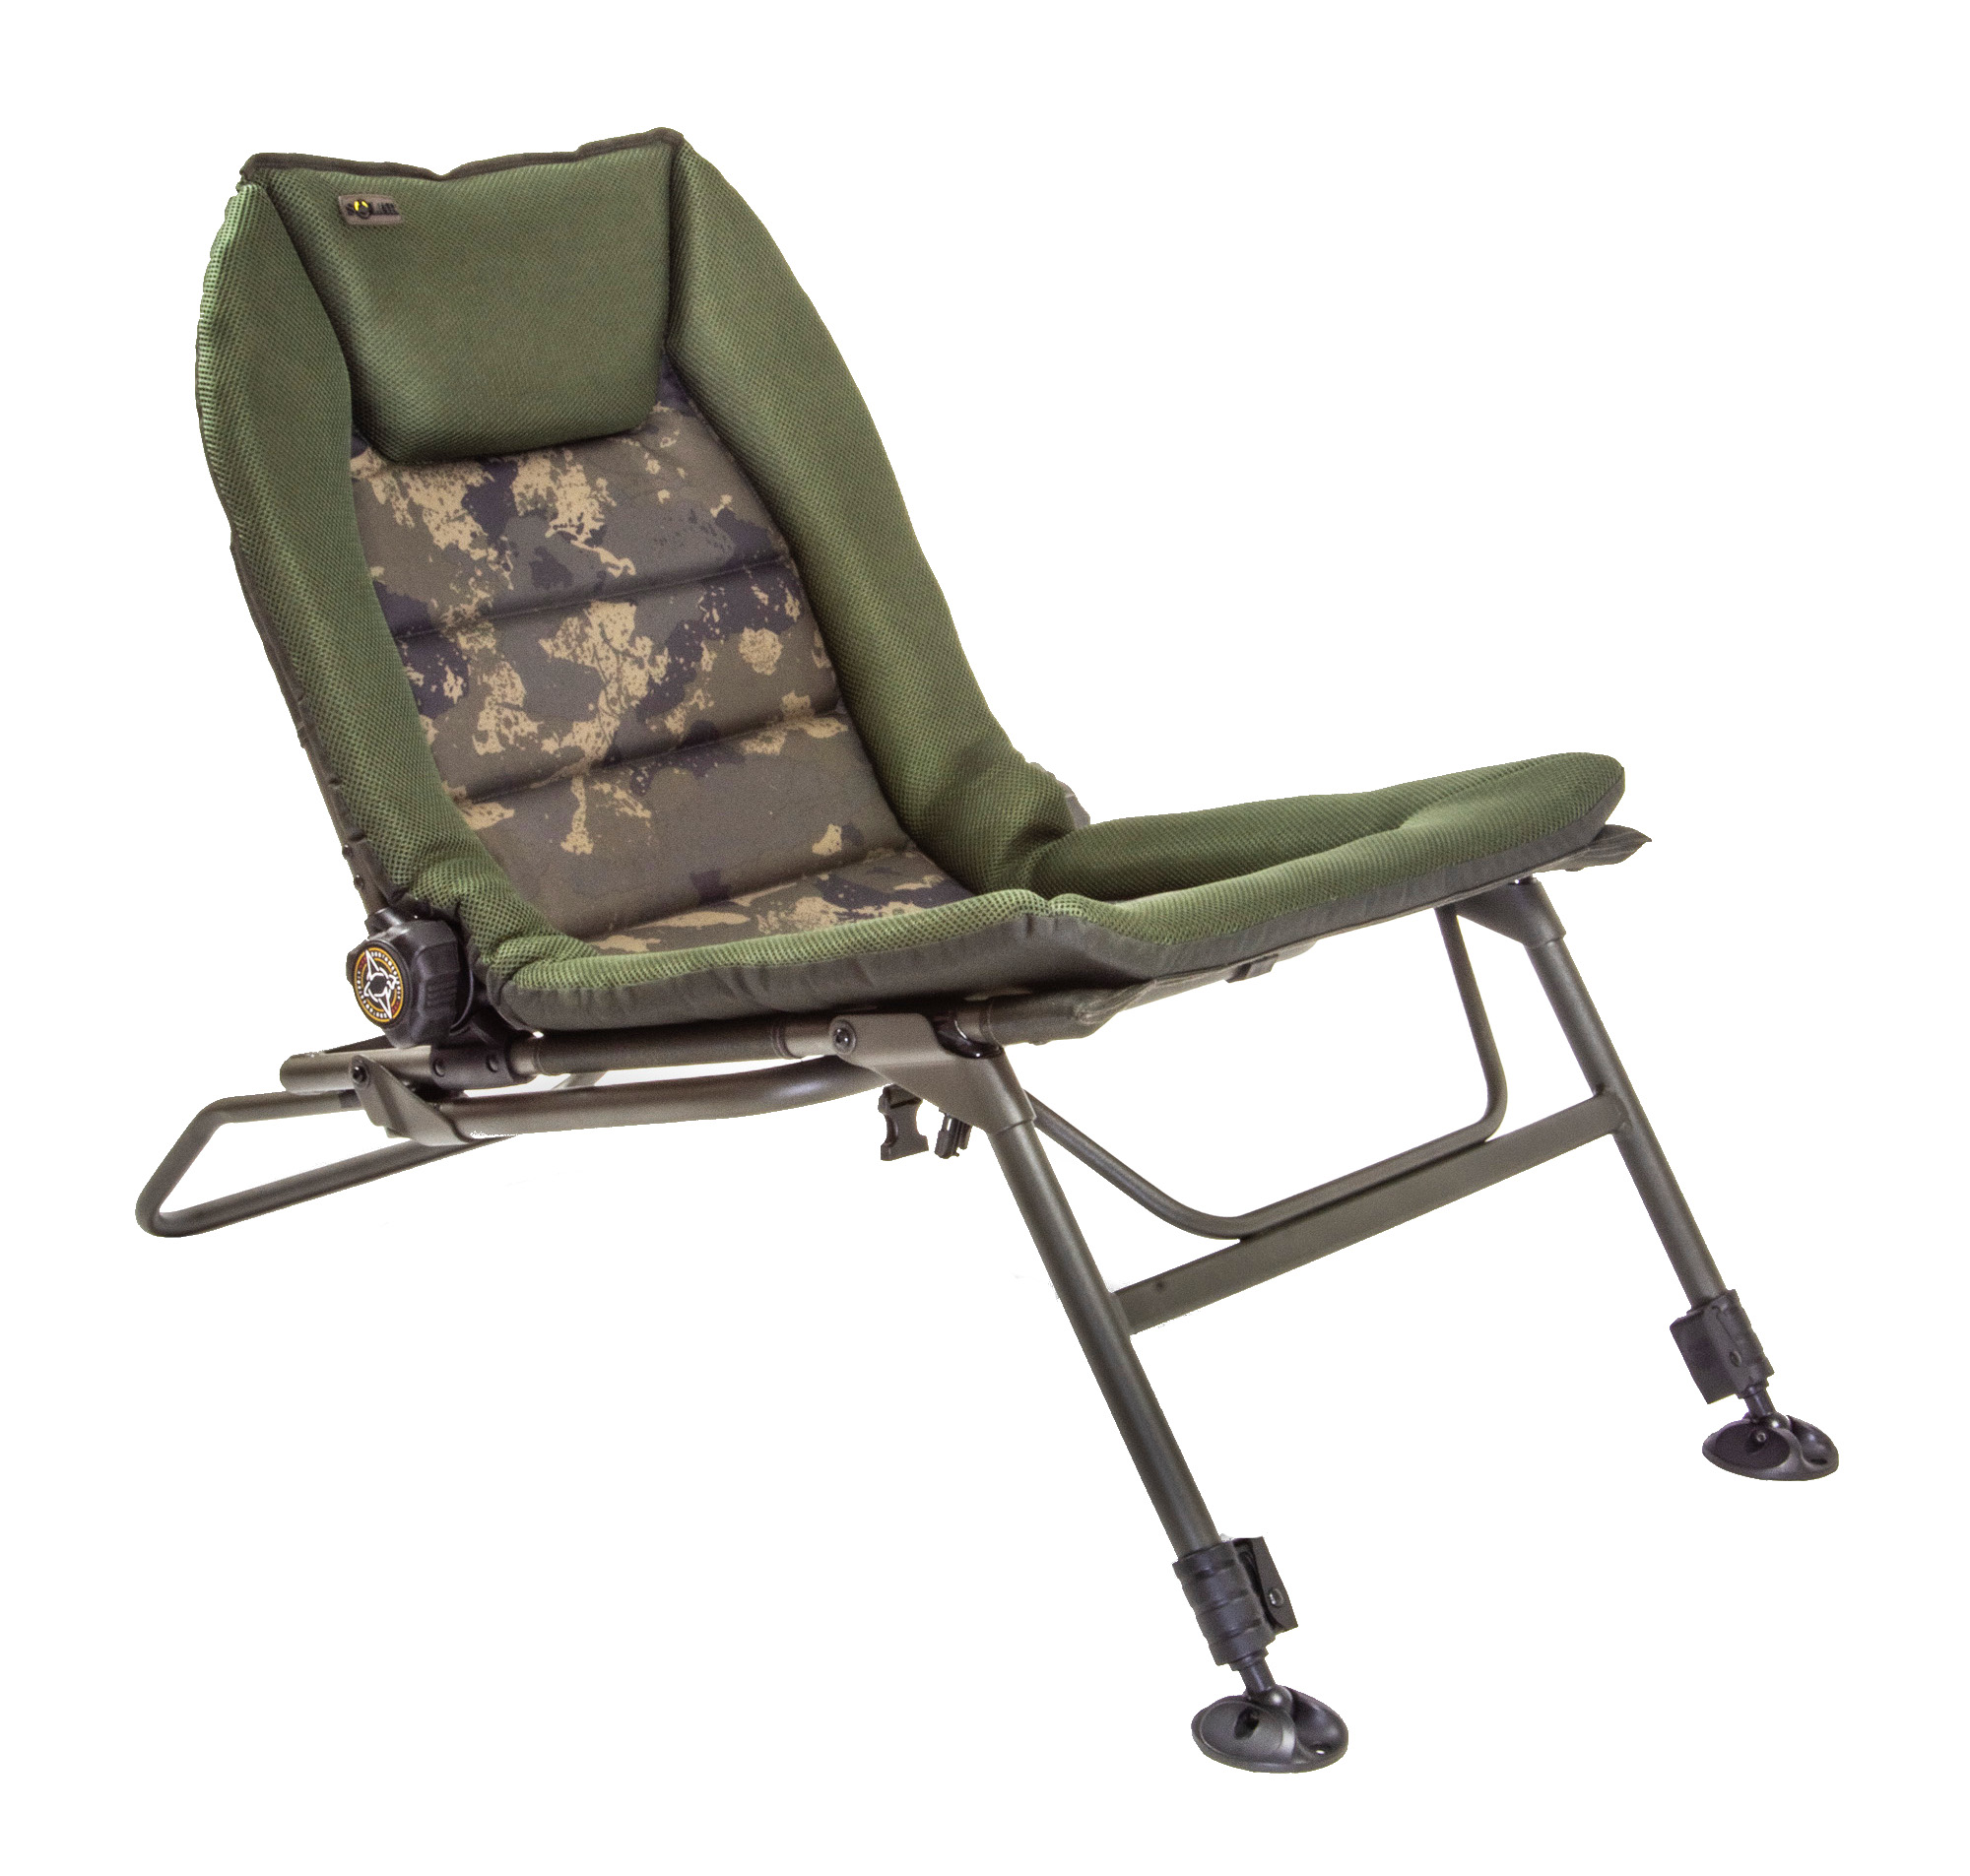 Solar South Westerly Pro Combi Chair Silla para Carpa (Bed-Fit & Recline)